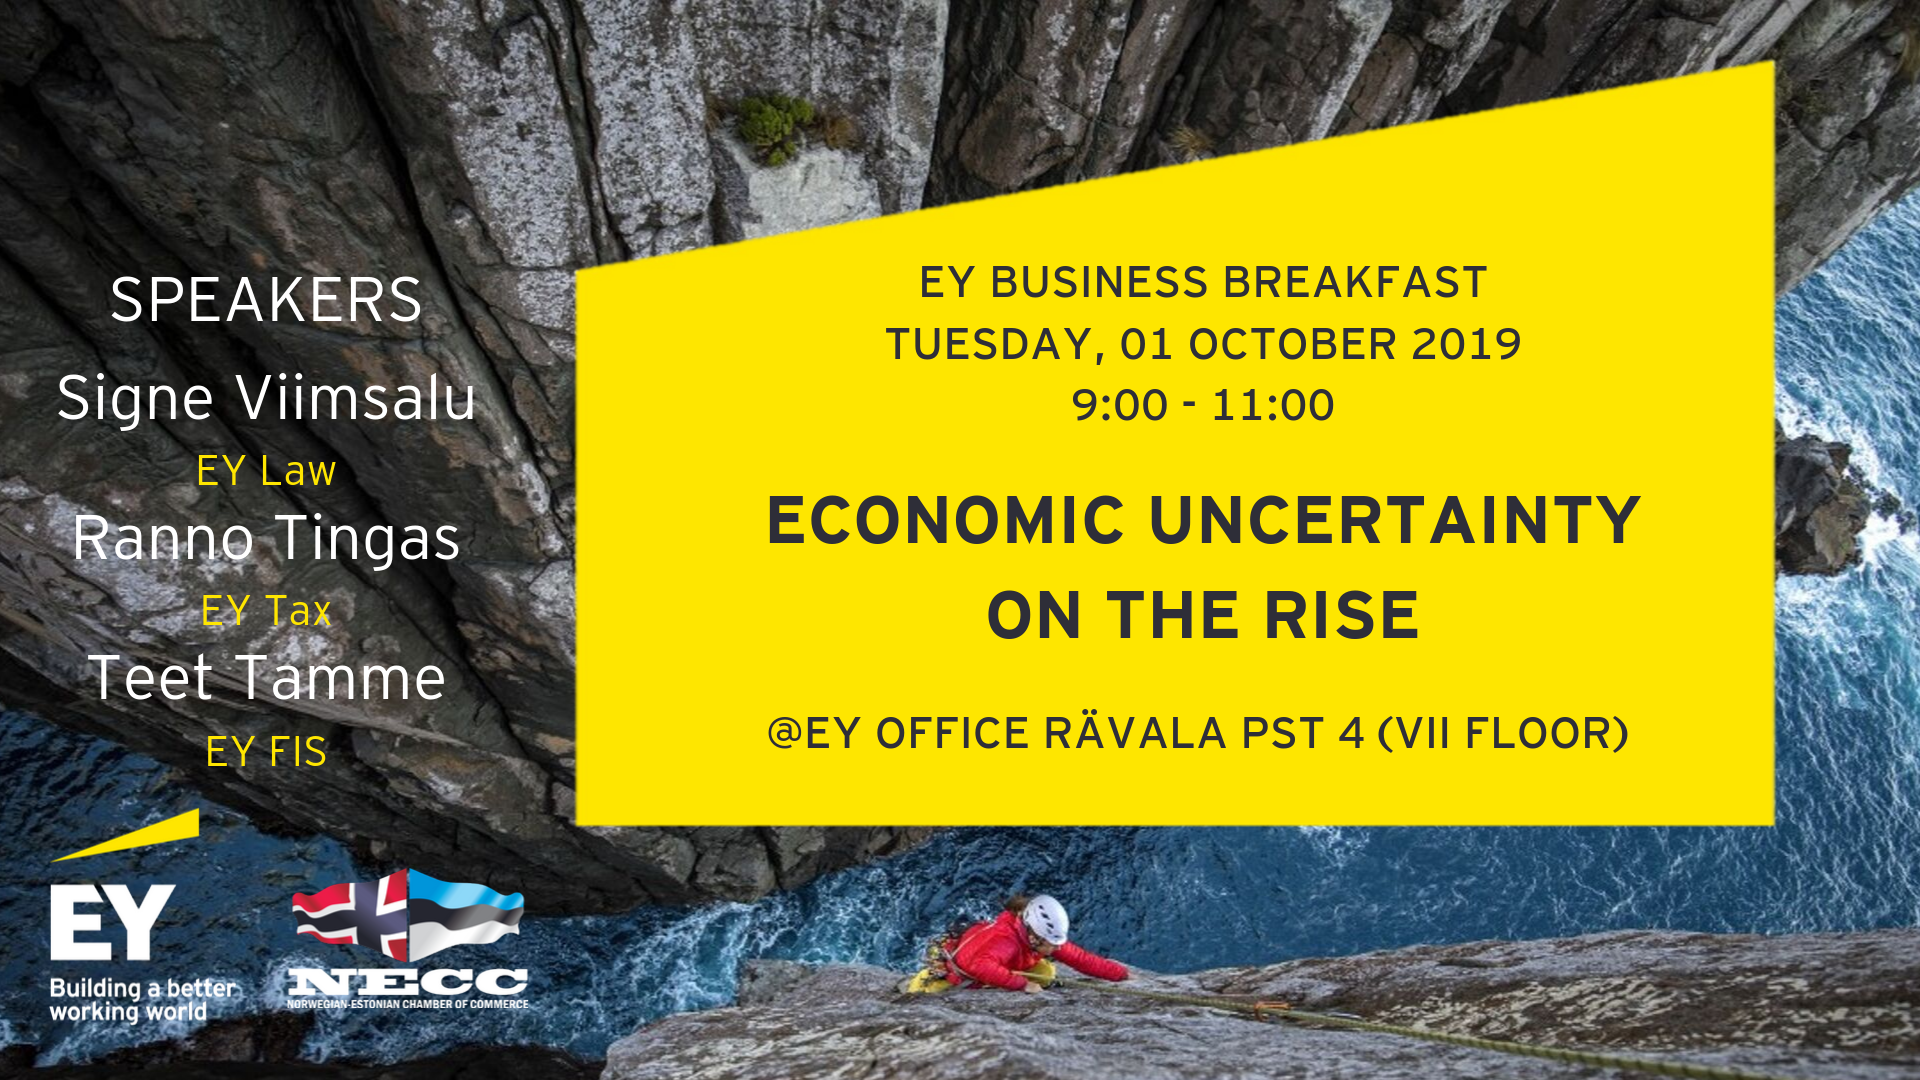 EY Business Breakfast „Economic uncertainty on the rise